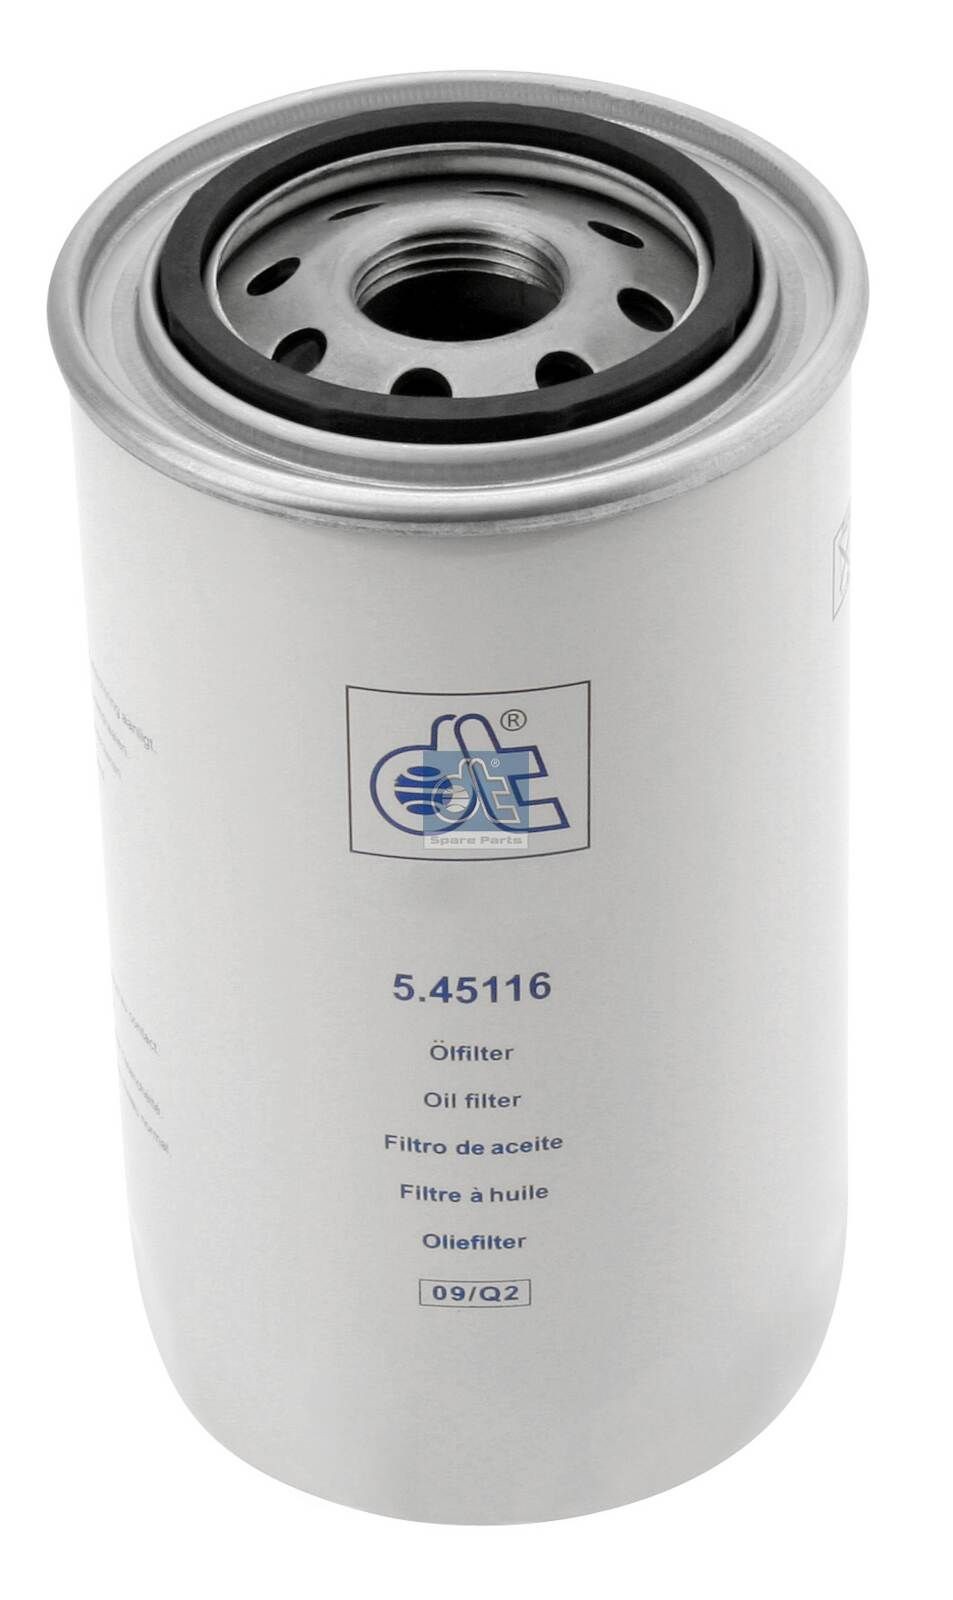 H19W10 DT Spare Parts 5.45116 Oil filter 02943401